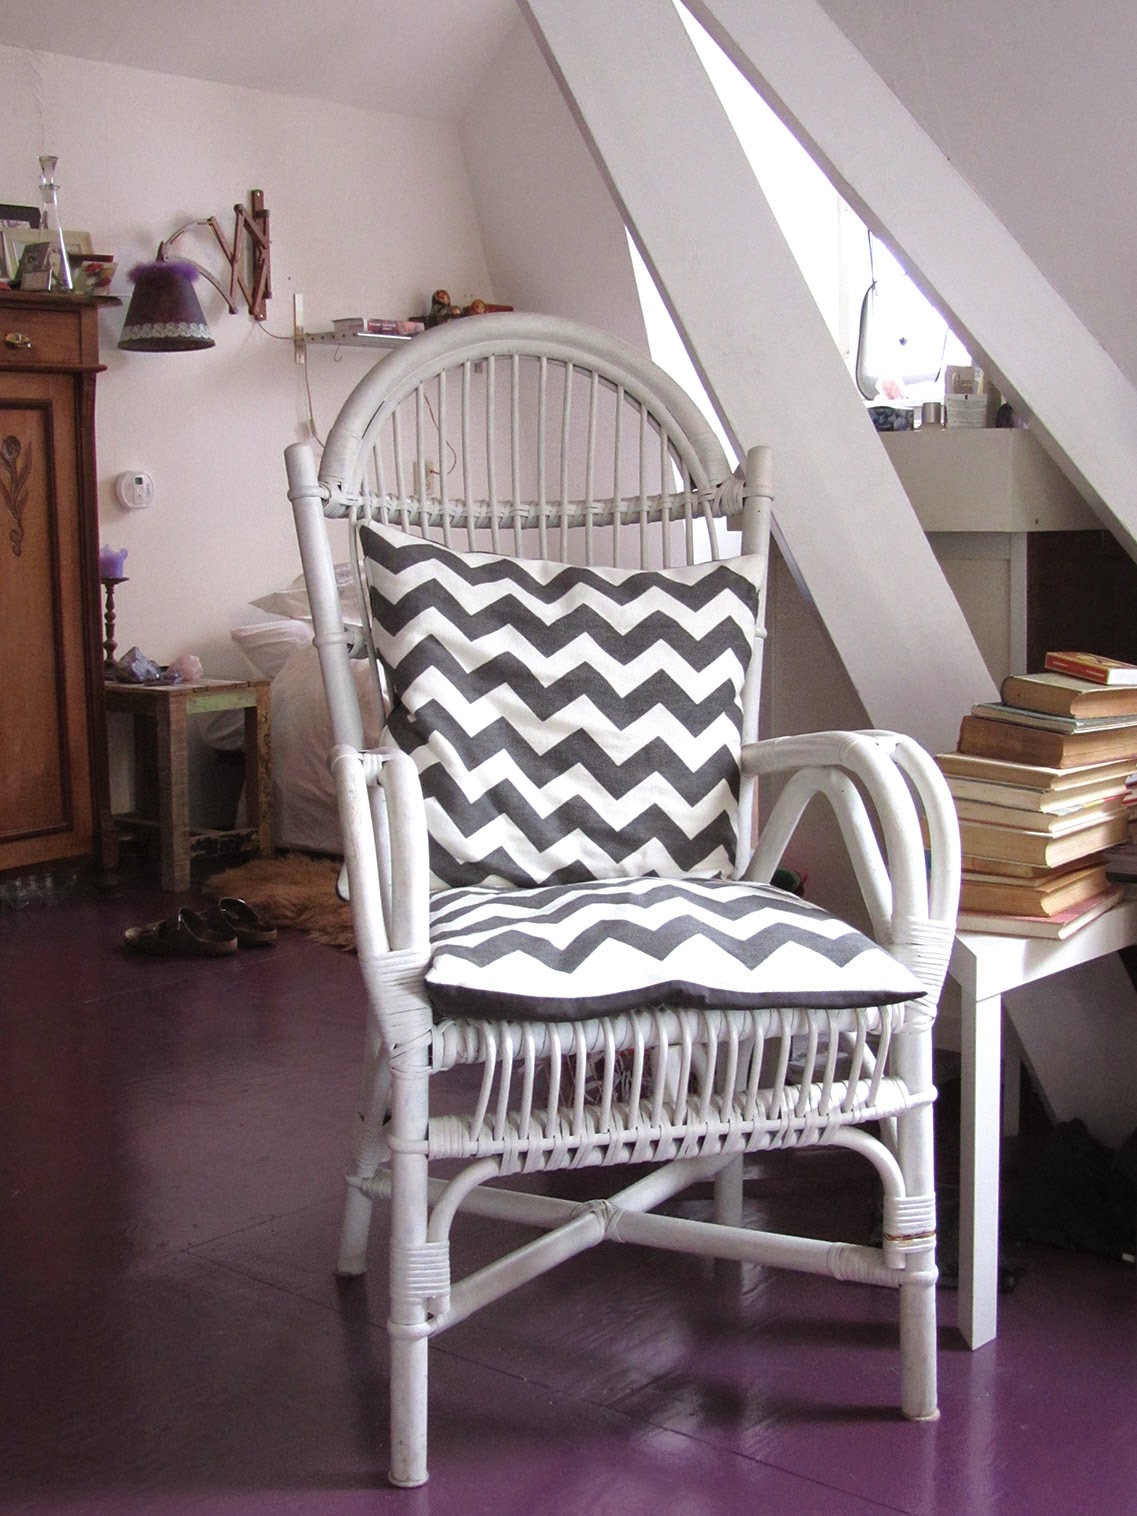 DIY painting a wicker chair, before